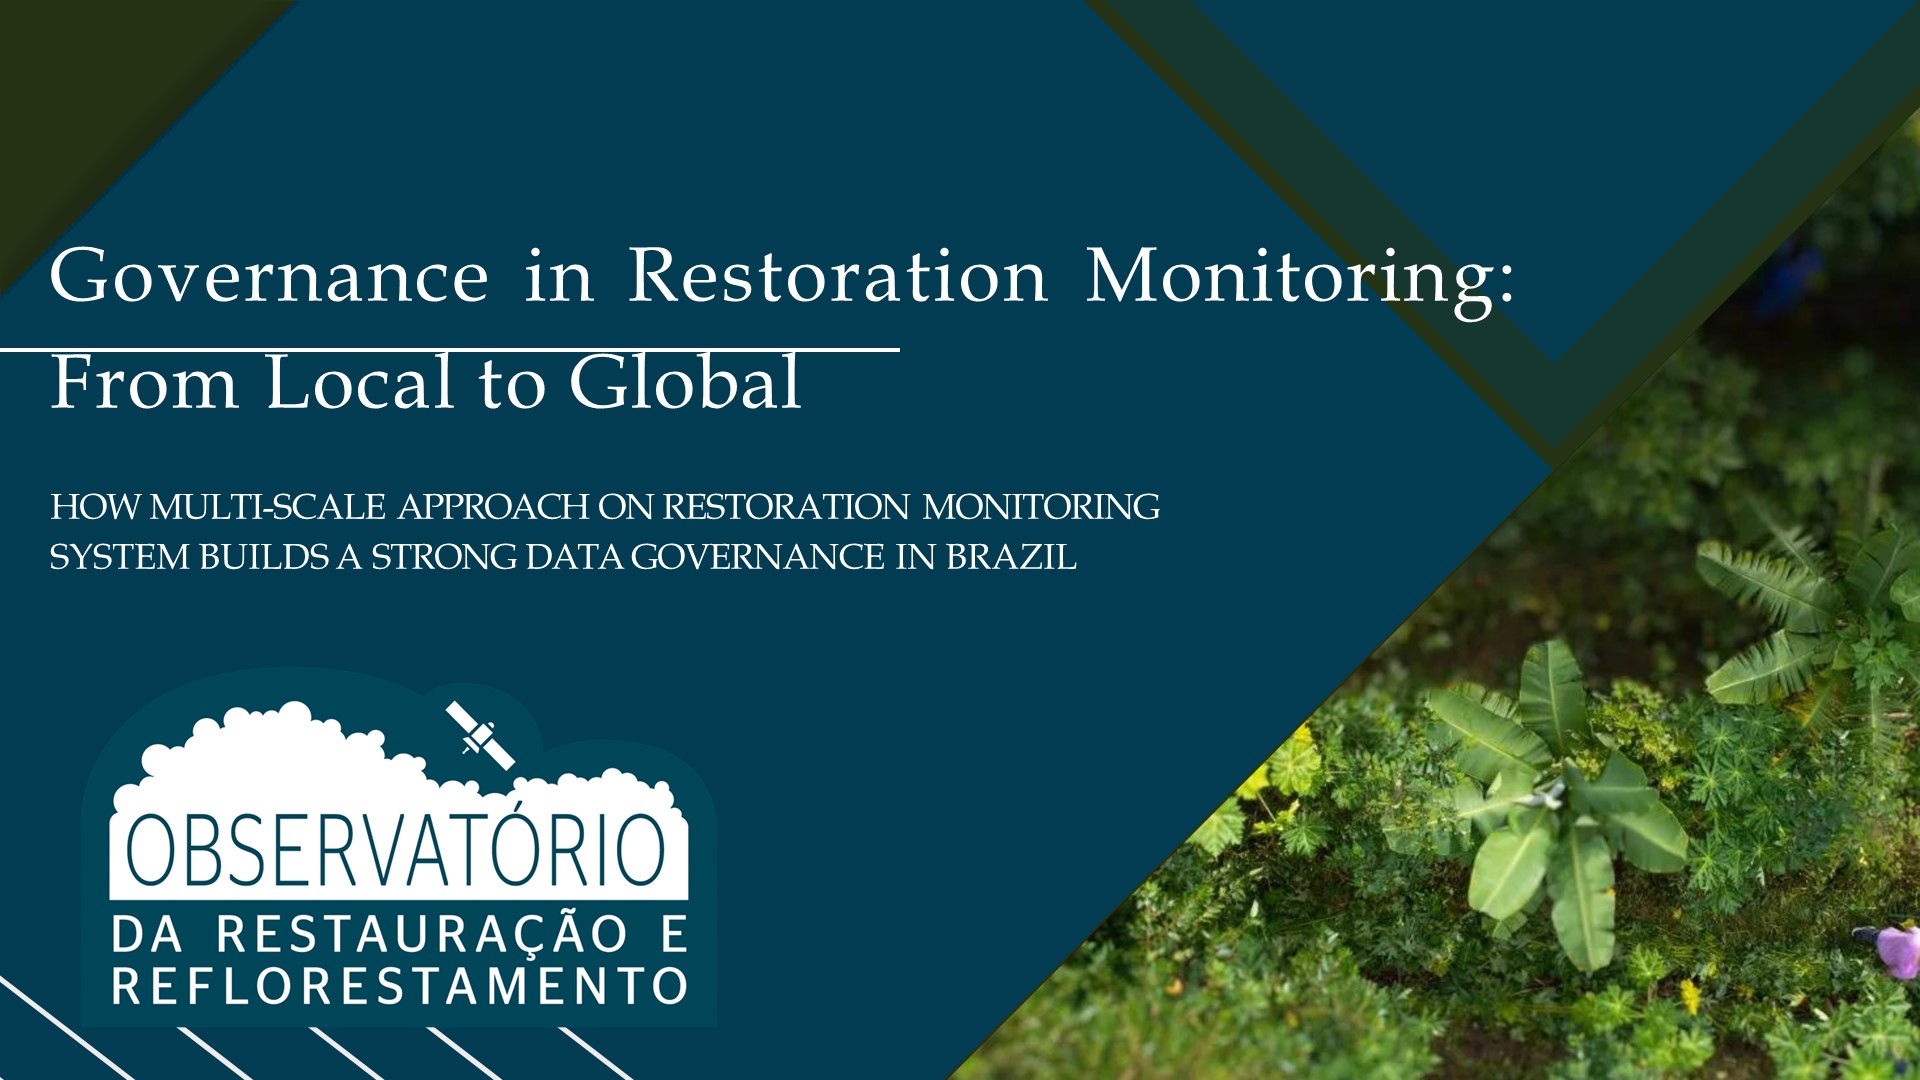 Symposium #35 Governance in Restoration Monitoring: From Local to Global. Organiser: Tainah Godoy and Cézar Borges. 